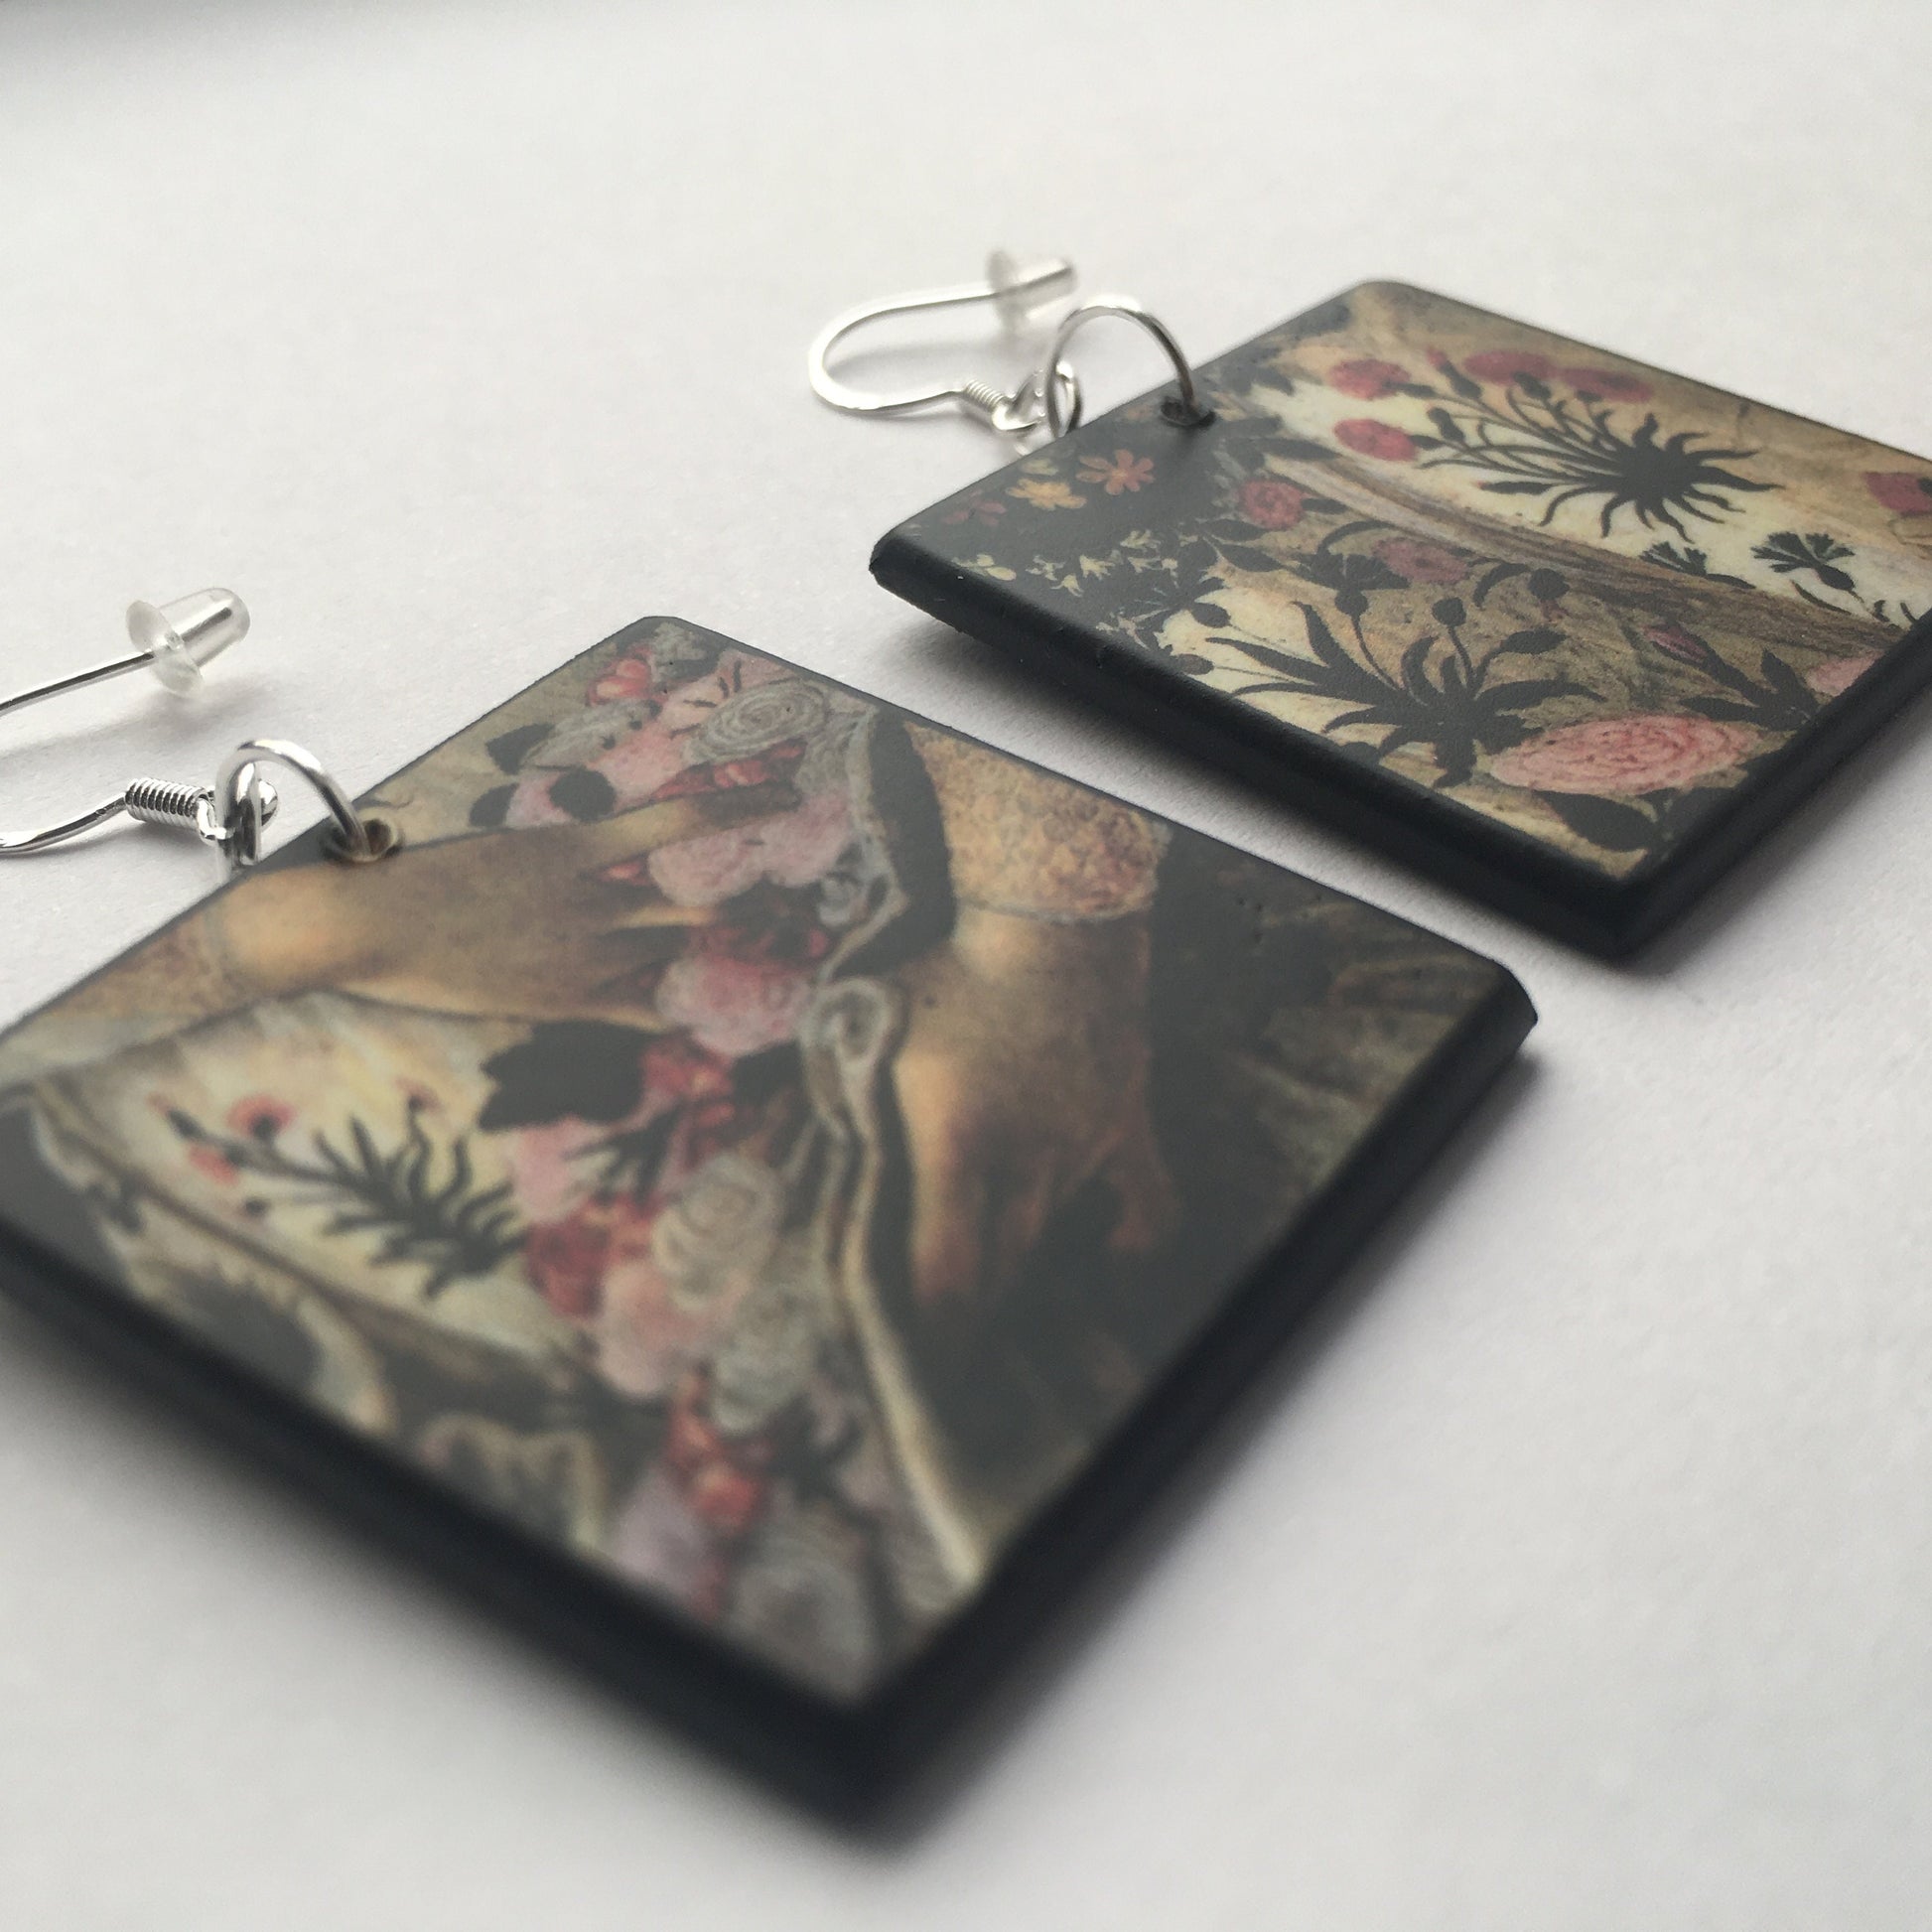 Botticelli, Spring Renaissance painting detail on top of these sustainable wood earrings with sterling silver hooks. Mismatched, aesthetic earrings, professionally handmade for the perfect romantic anniversary earrings gift. 